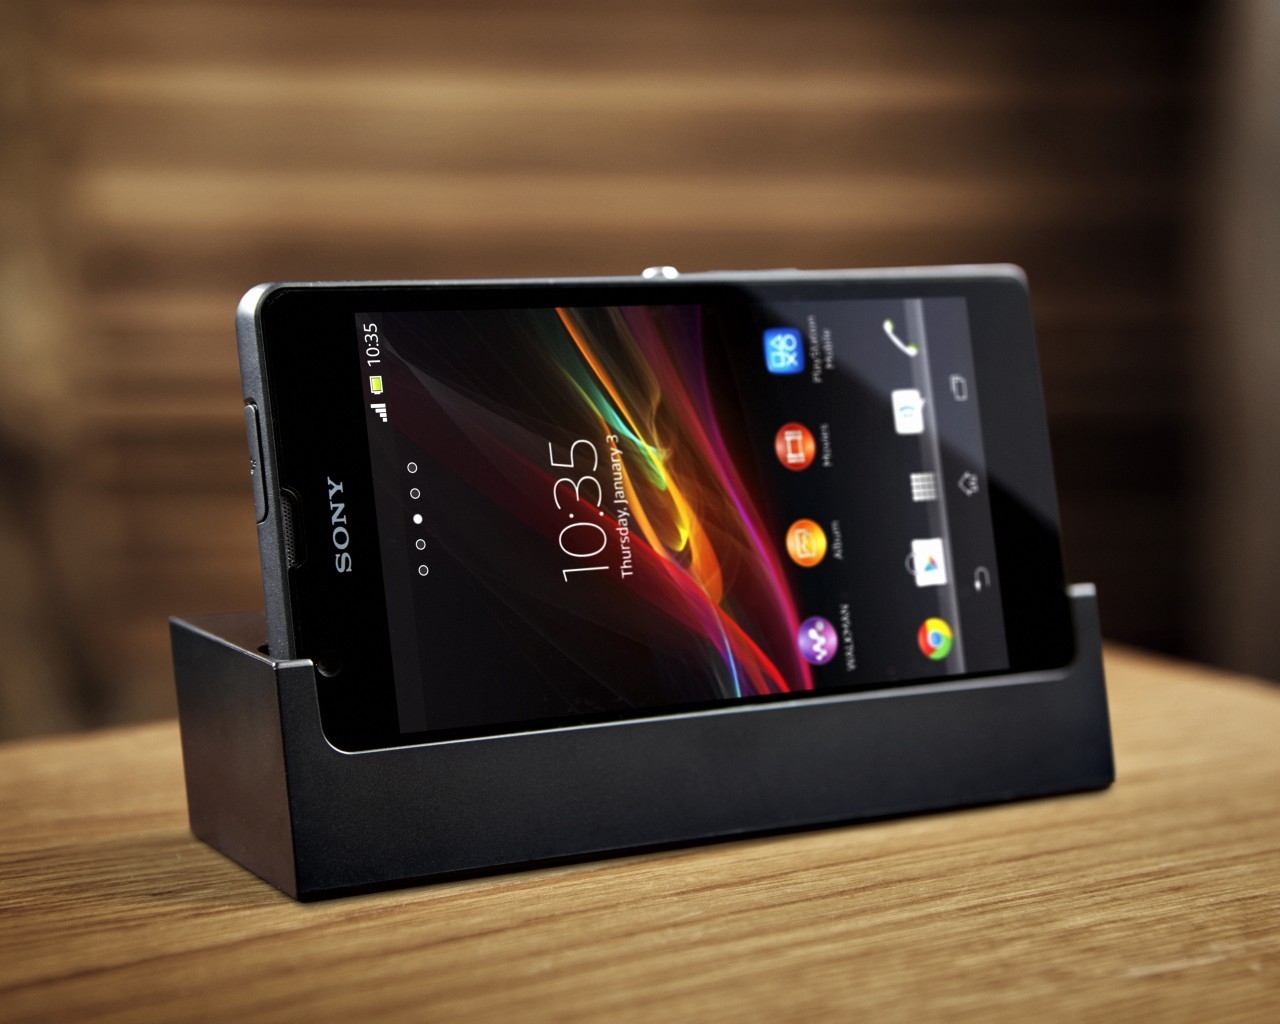 Xperia ZR for 1280 x 1024 resolution